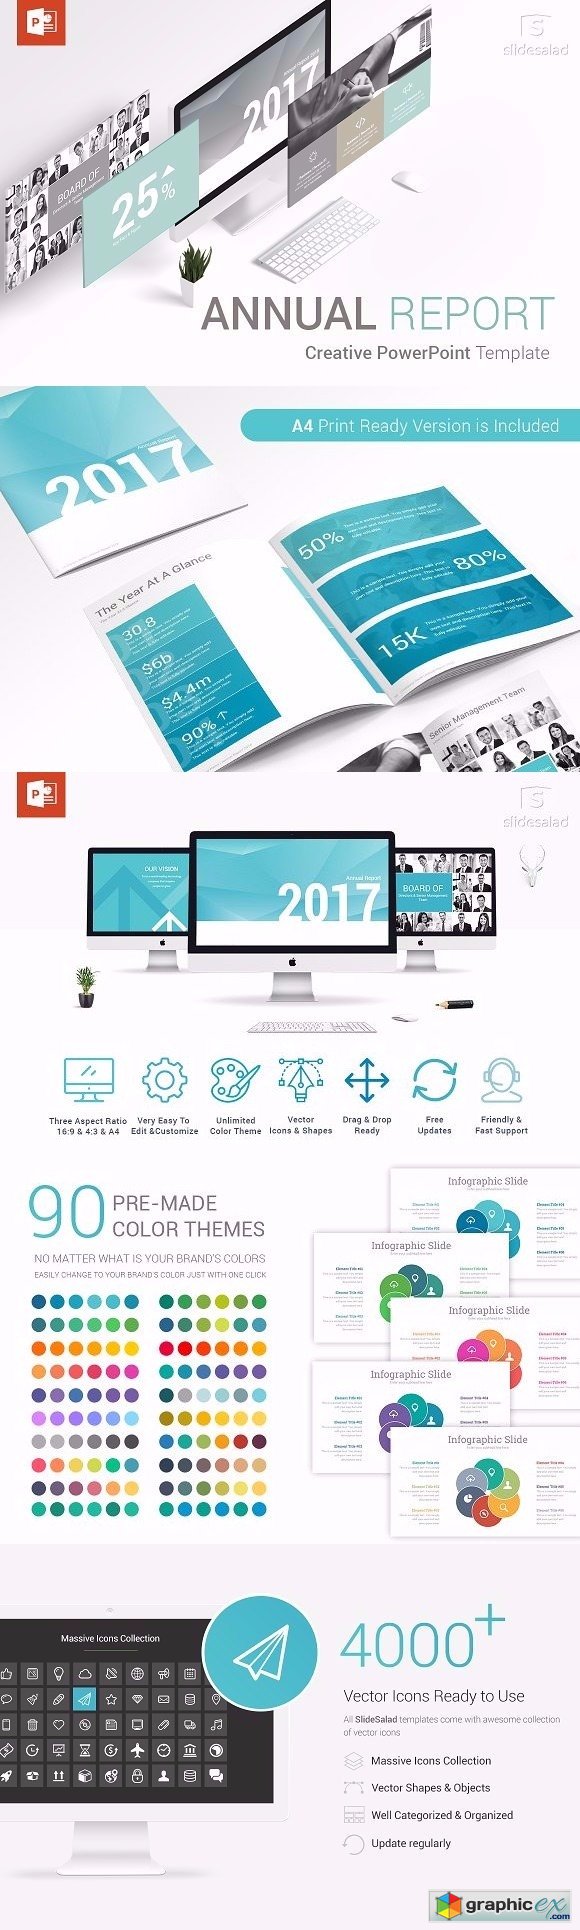 Annual Report PowerPoint Template 2111187